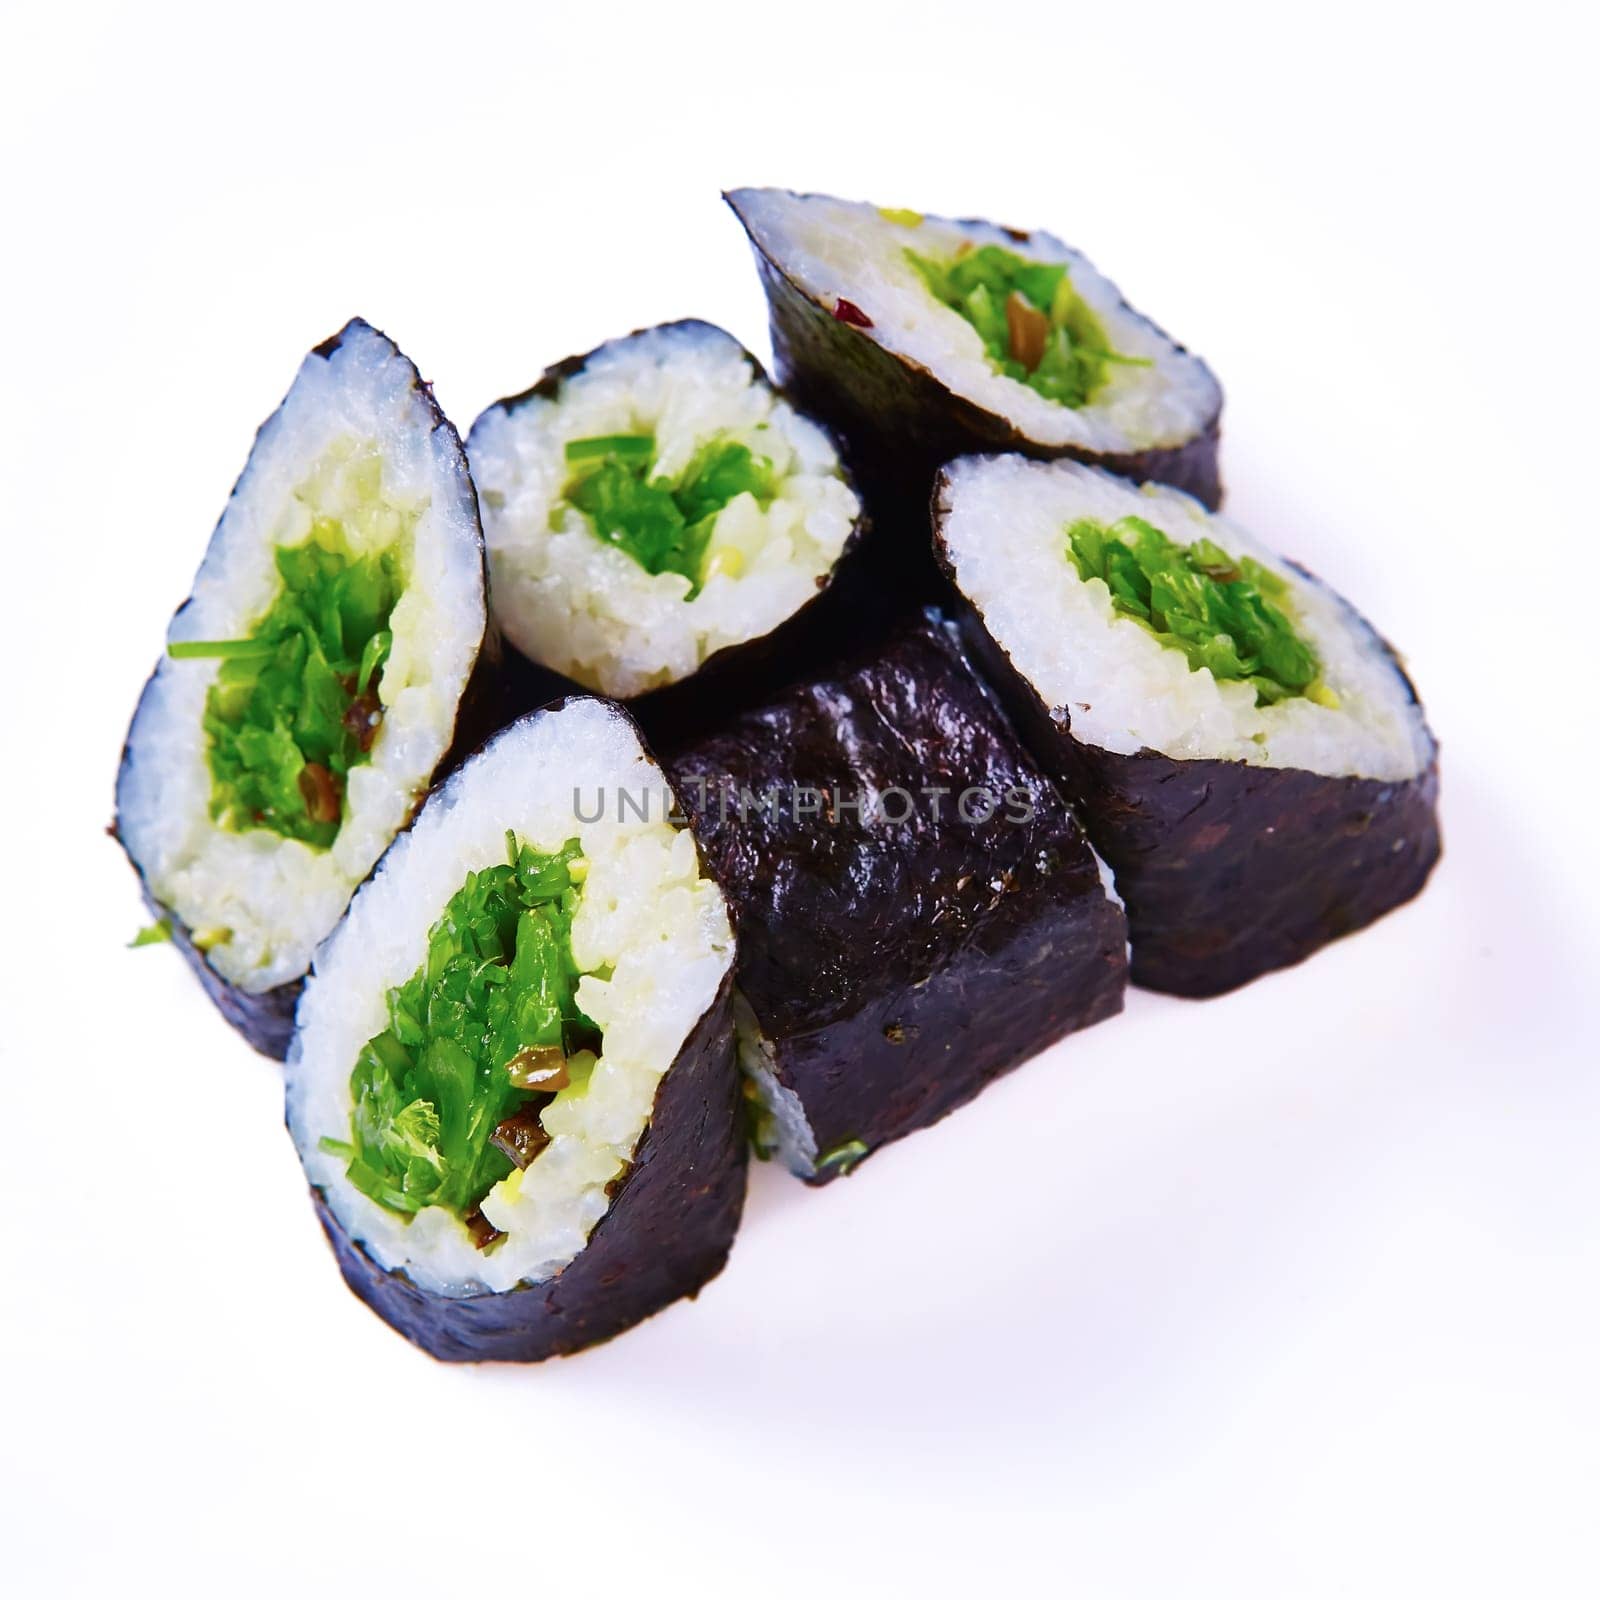 Sushi rolls with hiashi seaweed. Vegetarian maki rolls. Low calorie meal. Japanese food. Asian cuisine. White background. Close-up. Soft focus